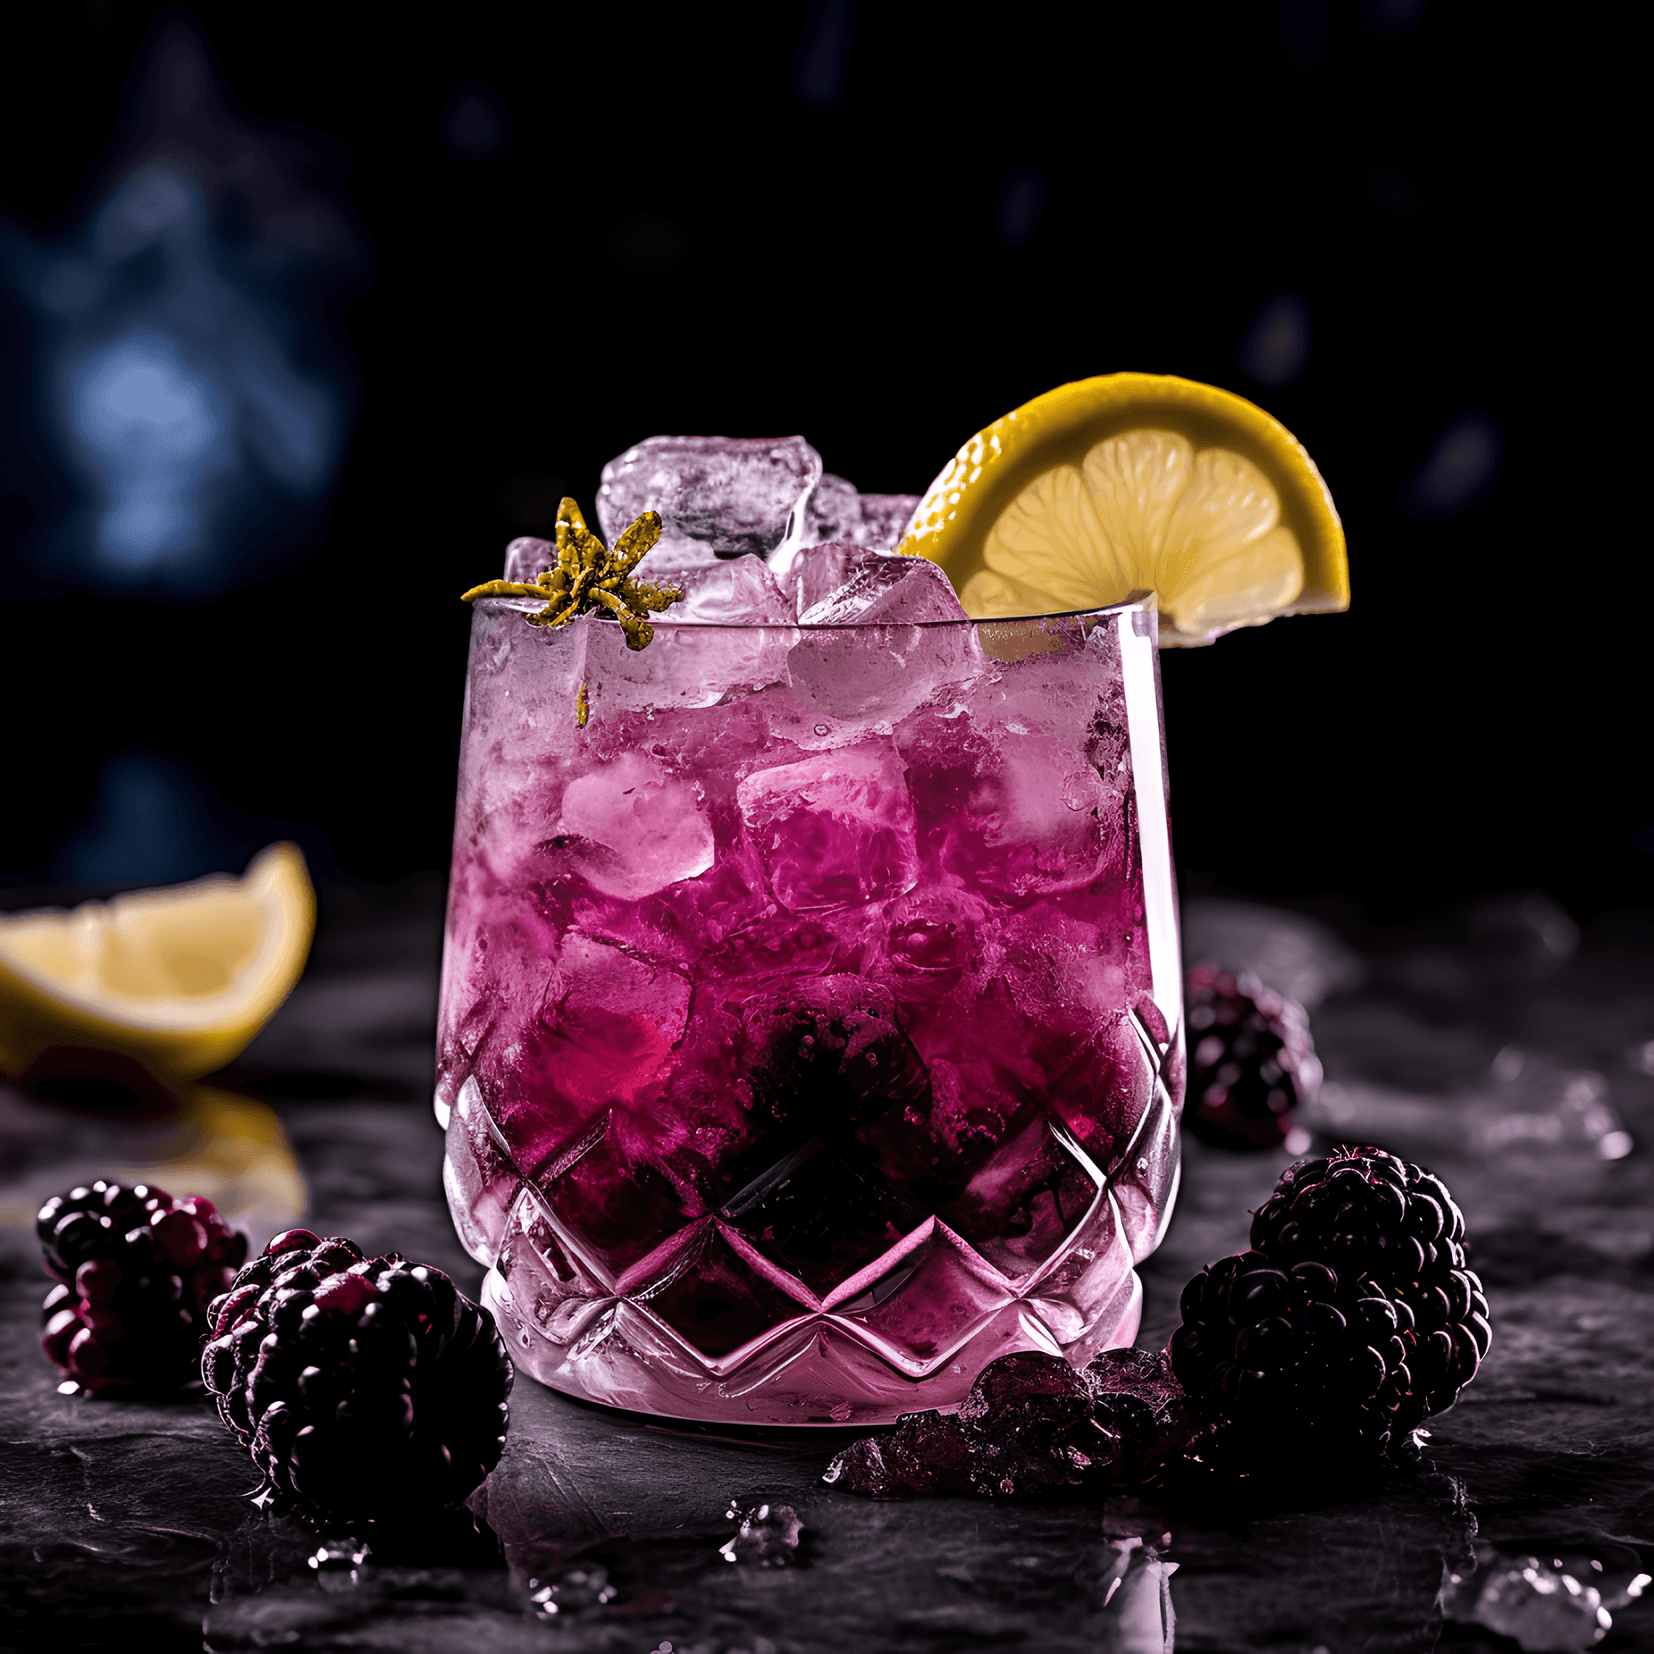 The Blackberry Bramble is a sweet, fruity, and refreshing cocktail with a tangy kick from the lemon juice. It has a well-balanced flavor profile, making it a perfect choice for those who enjoy both sweet and sour notes in their cocktails.